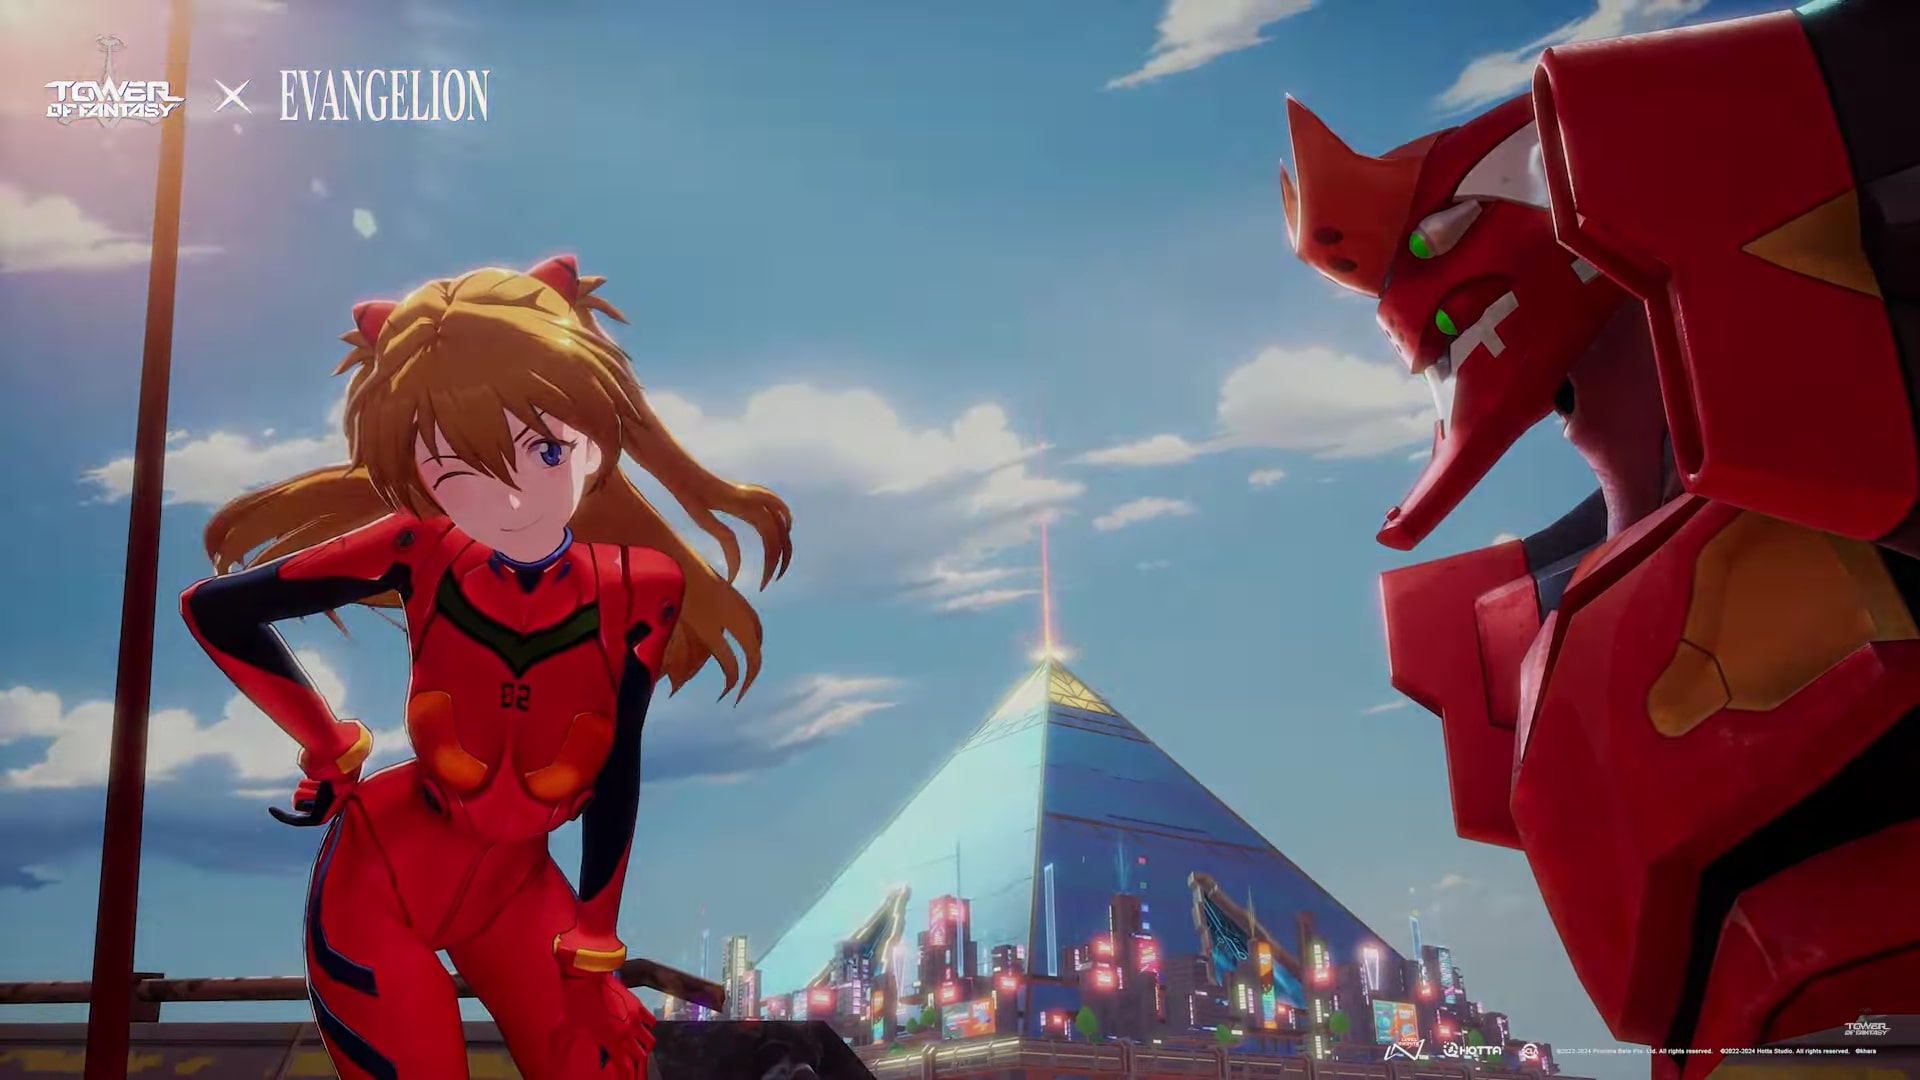 Meet New Asuka!: Tower of Fantasy Introduces Evangelion Collab (Done)